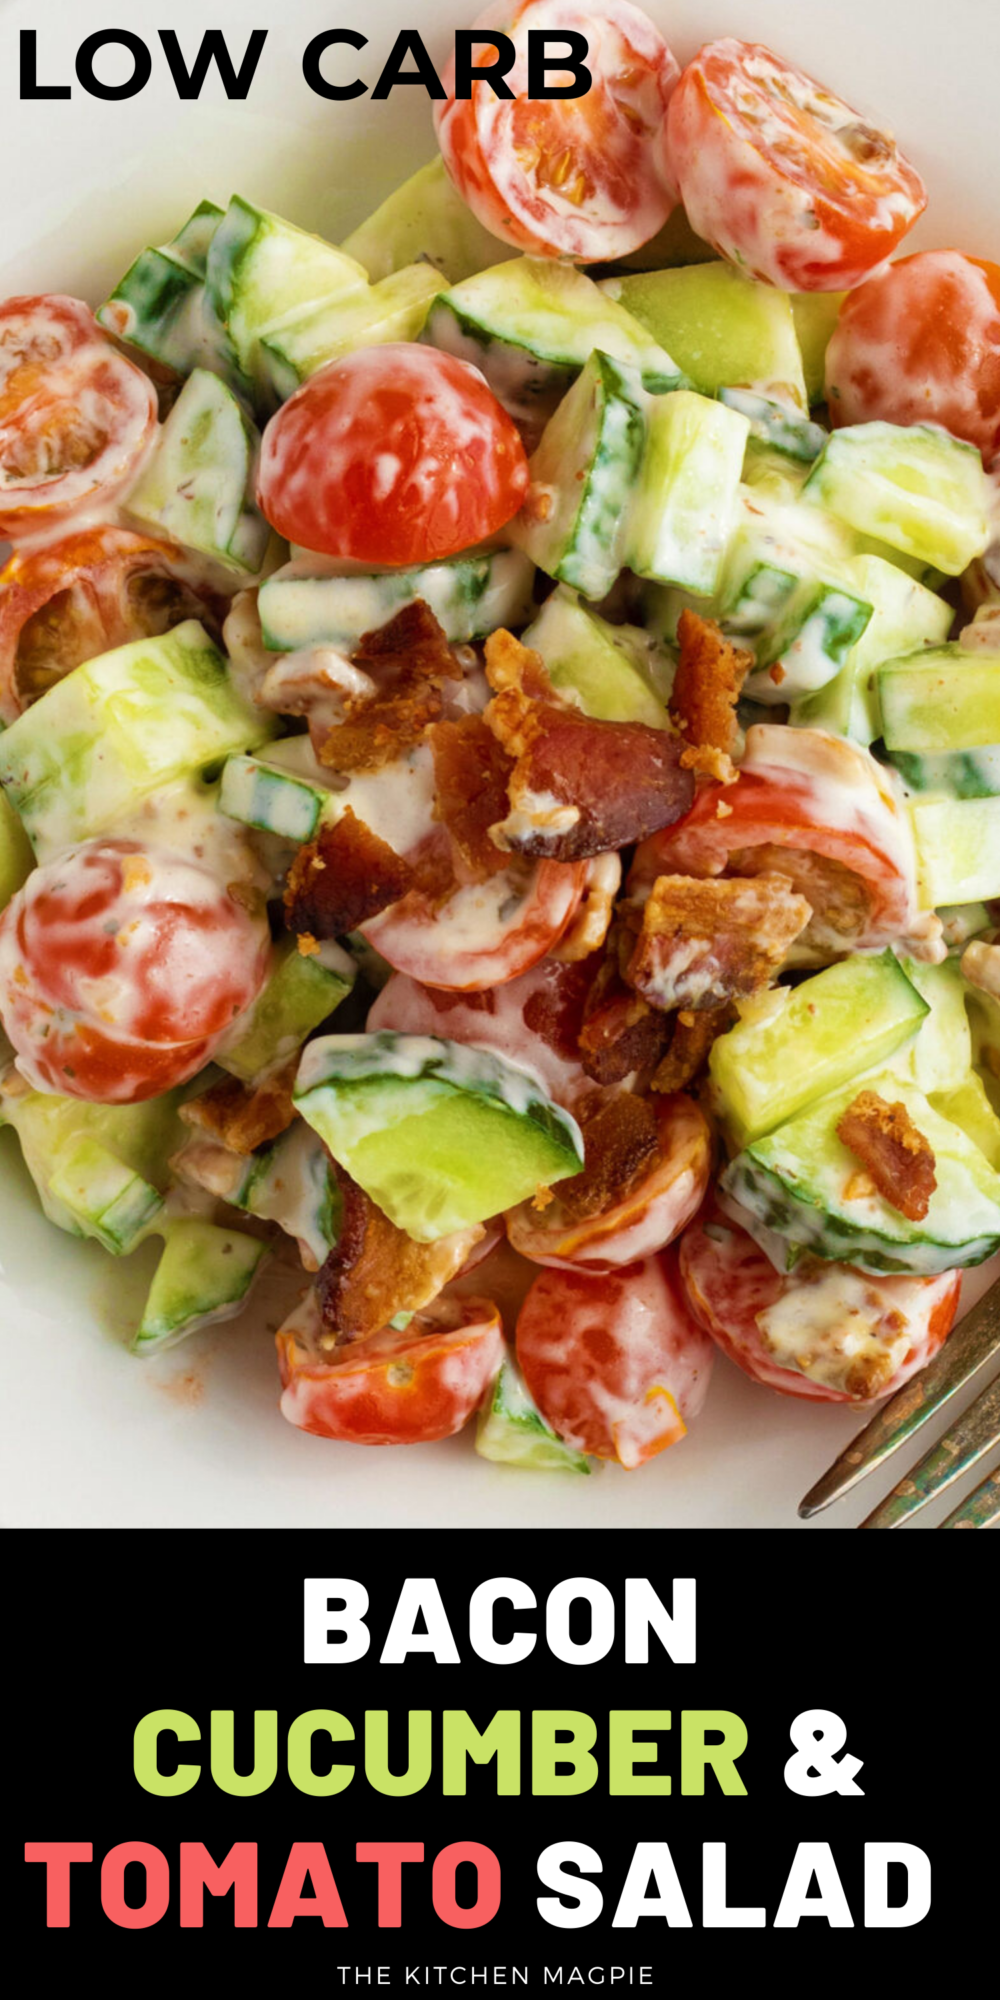 This creamy cucumber tomato salad is a popular low carb salad with bacon and Ranch dressing, but it's so delicious and easy to make that everyone needs to try it!